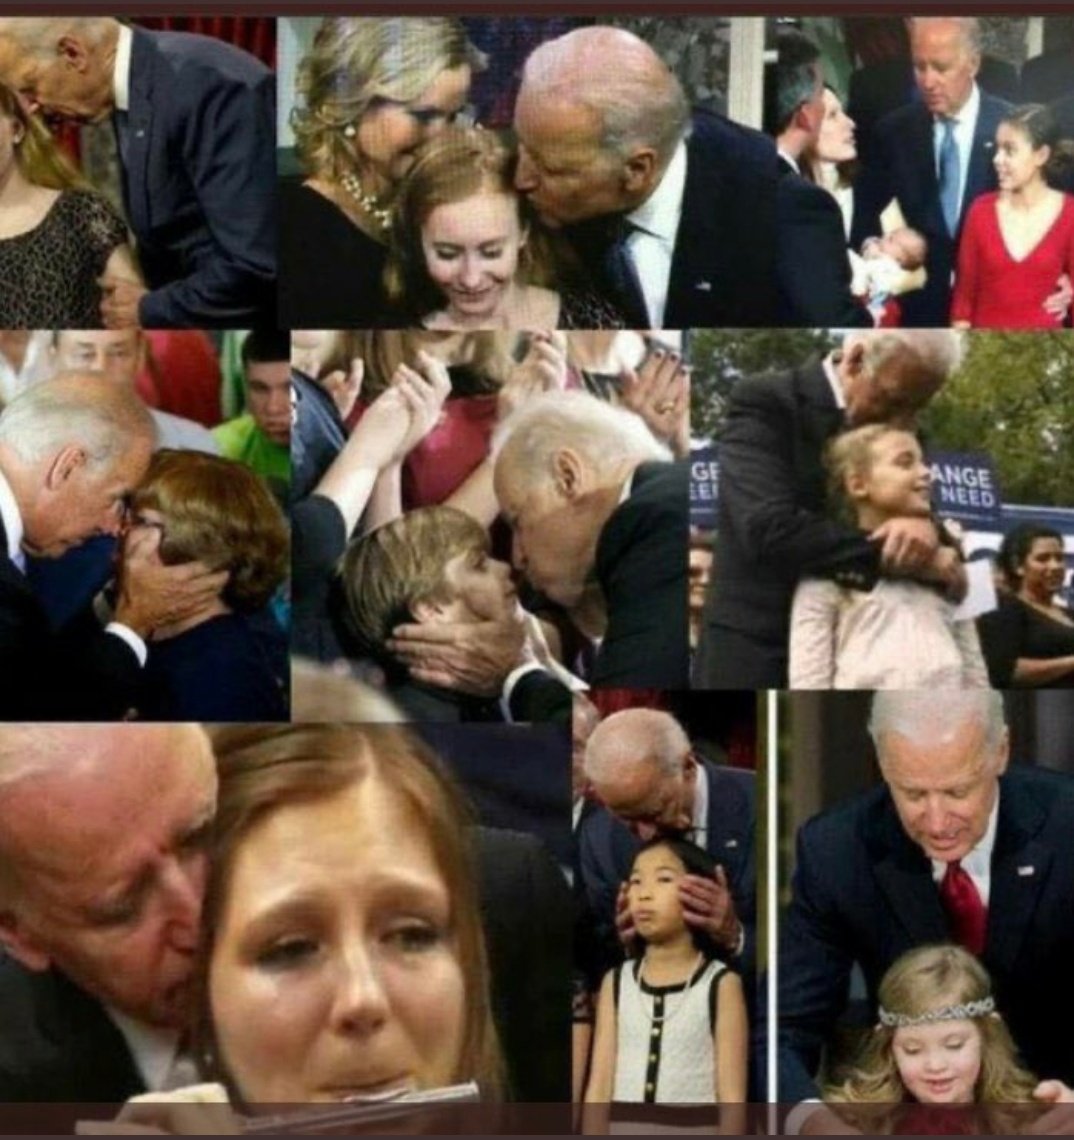 WHY DOES THE FBI TARGET ONLY P DIDDY WHEN JOE BIDEN, BARACK OBAMA, AND CONGRESS, HAVE BEEN SEX TRAFFICKING MILLIONS OF CHILDREN ACROSS OUR SOUTHERN BORDER👇FOR DECADES?😕